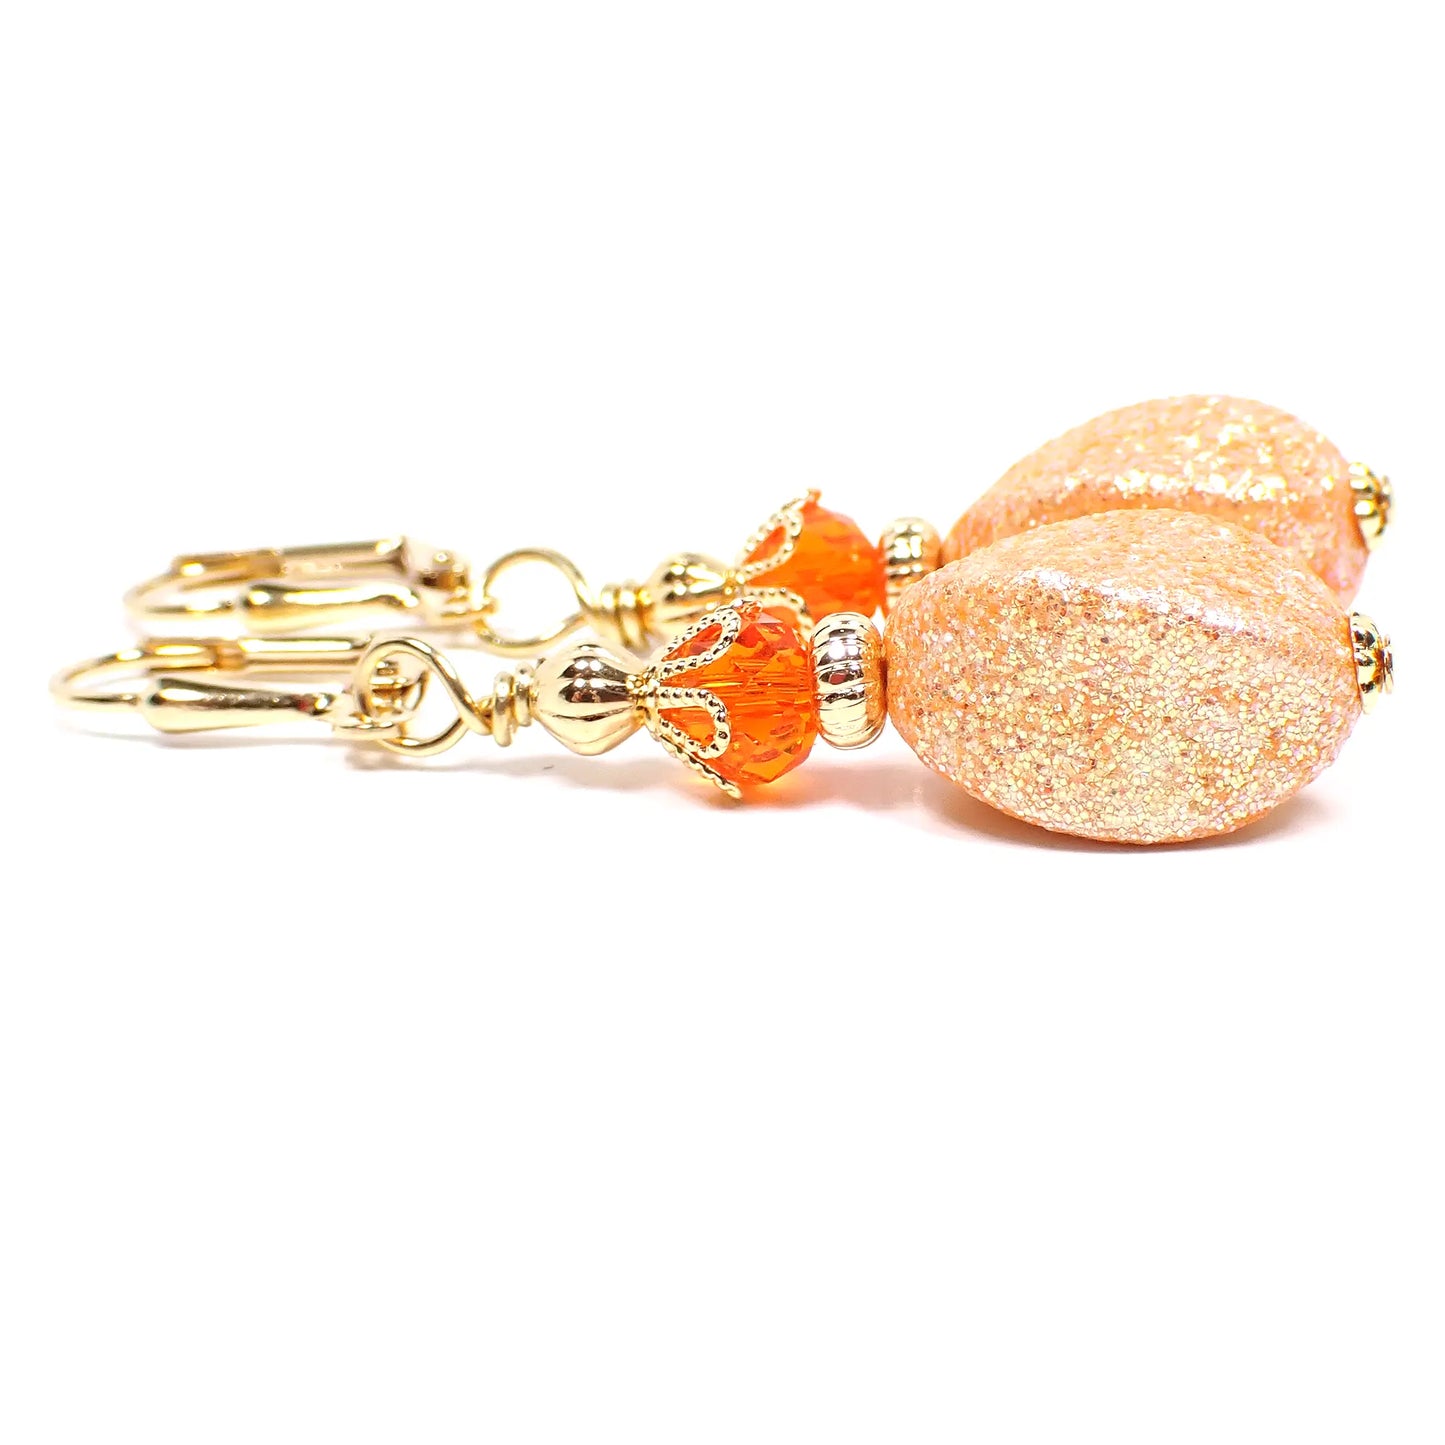 Handmade Drop Earrings with Orange Vintage Acrylic Glitter Beads Gold Plated Hook Lever Back or Clip On